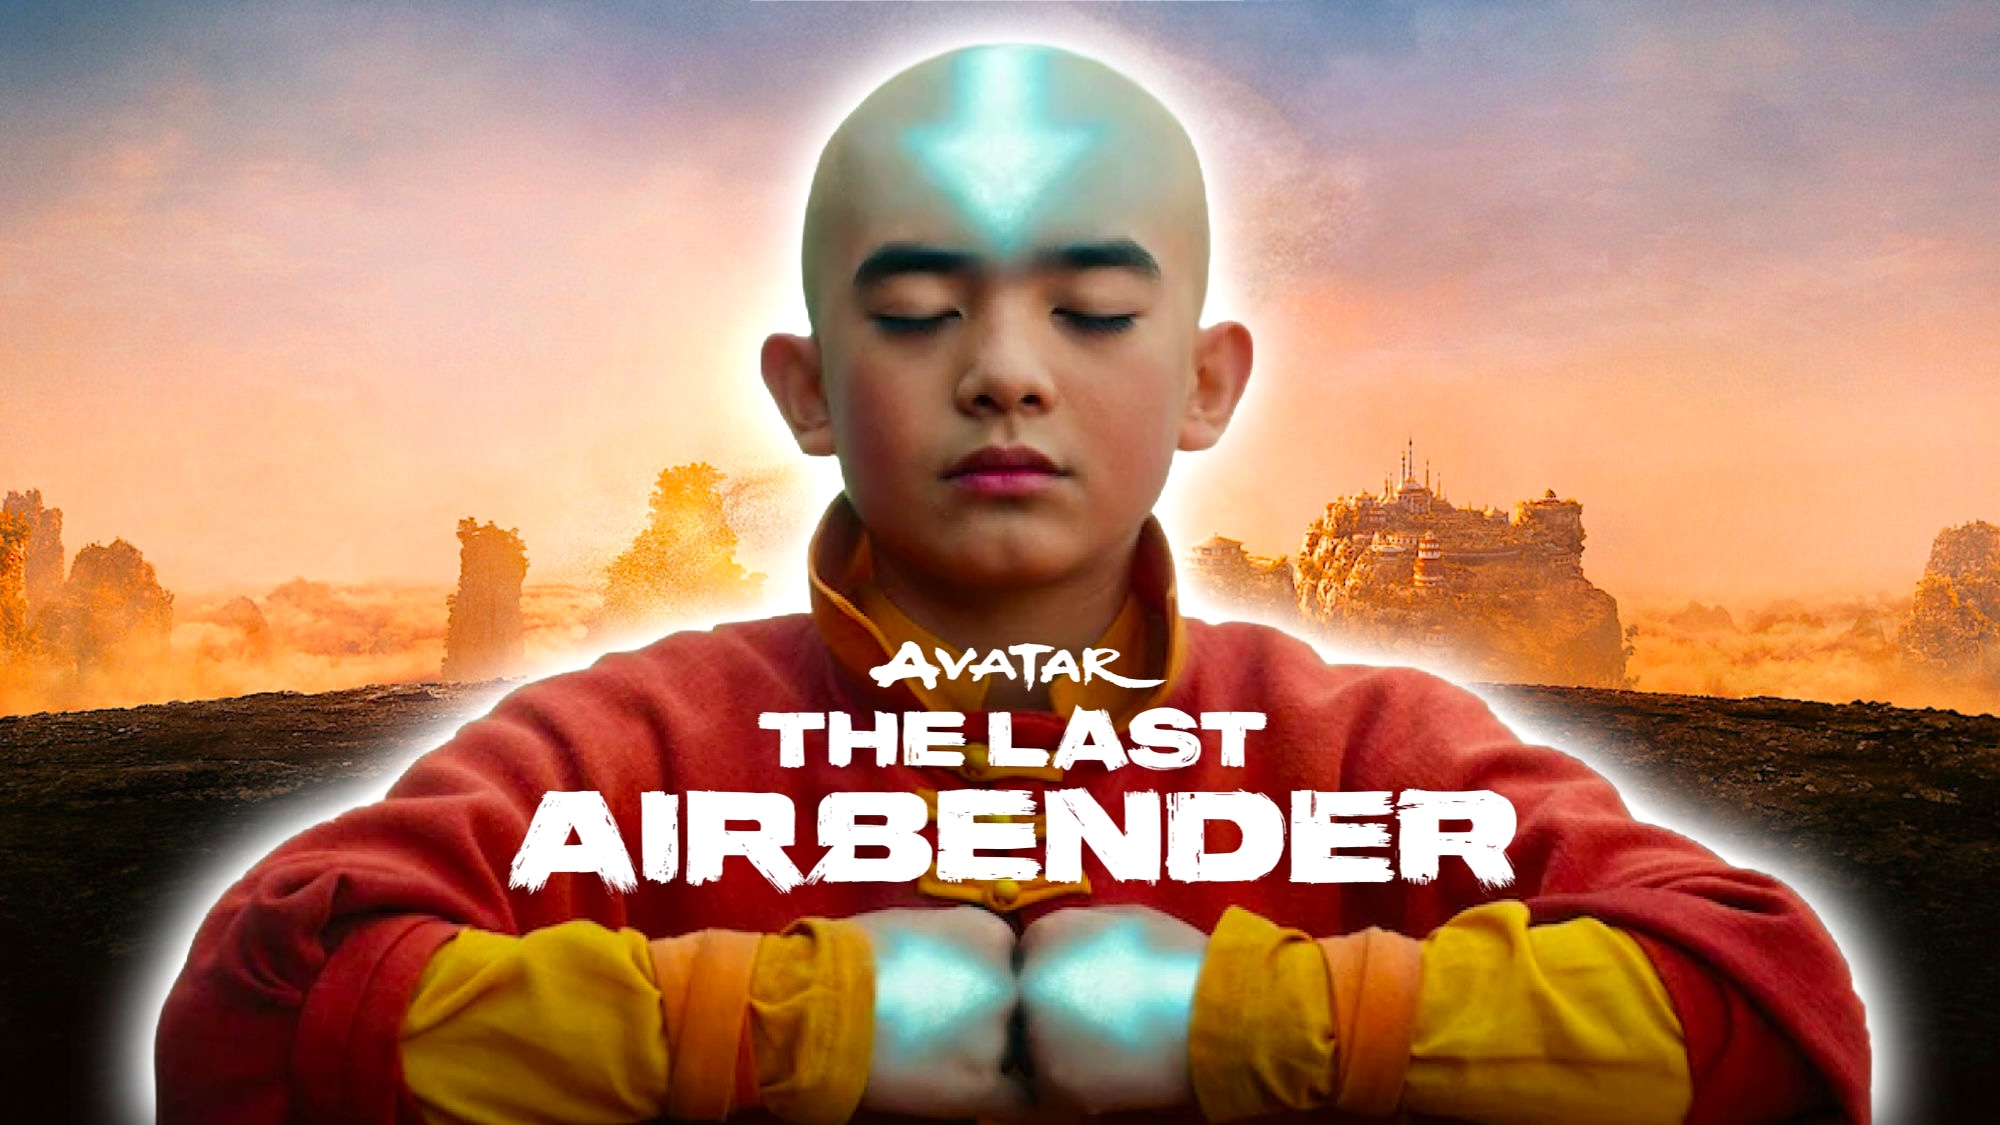 'Avatar: The Last Airbender' Seasons 2 and 3: What We Expect to See